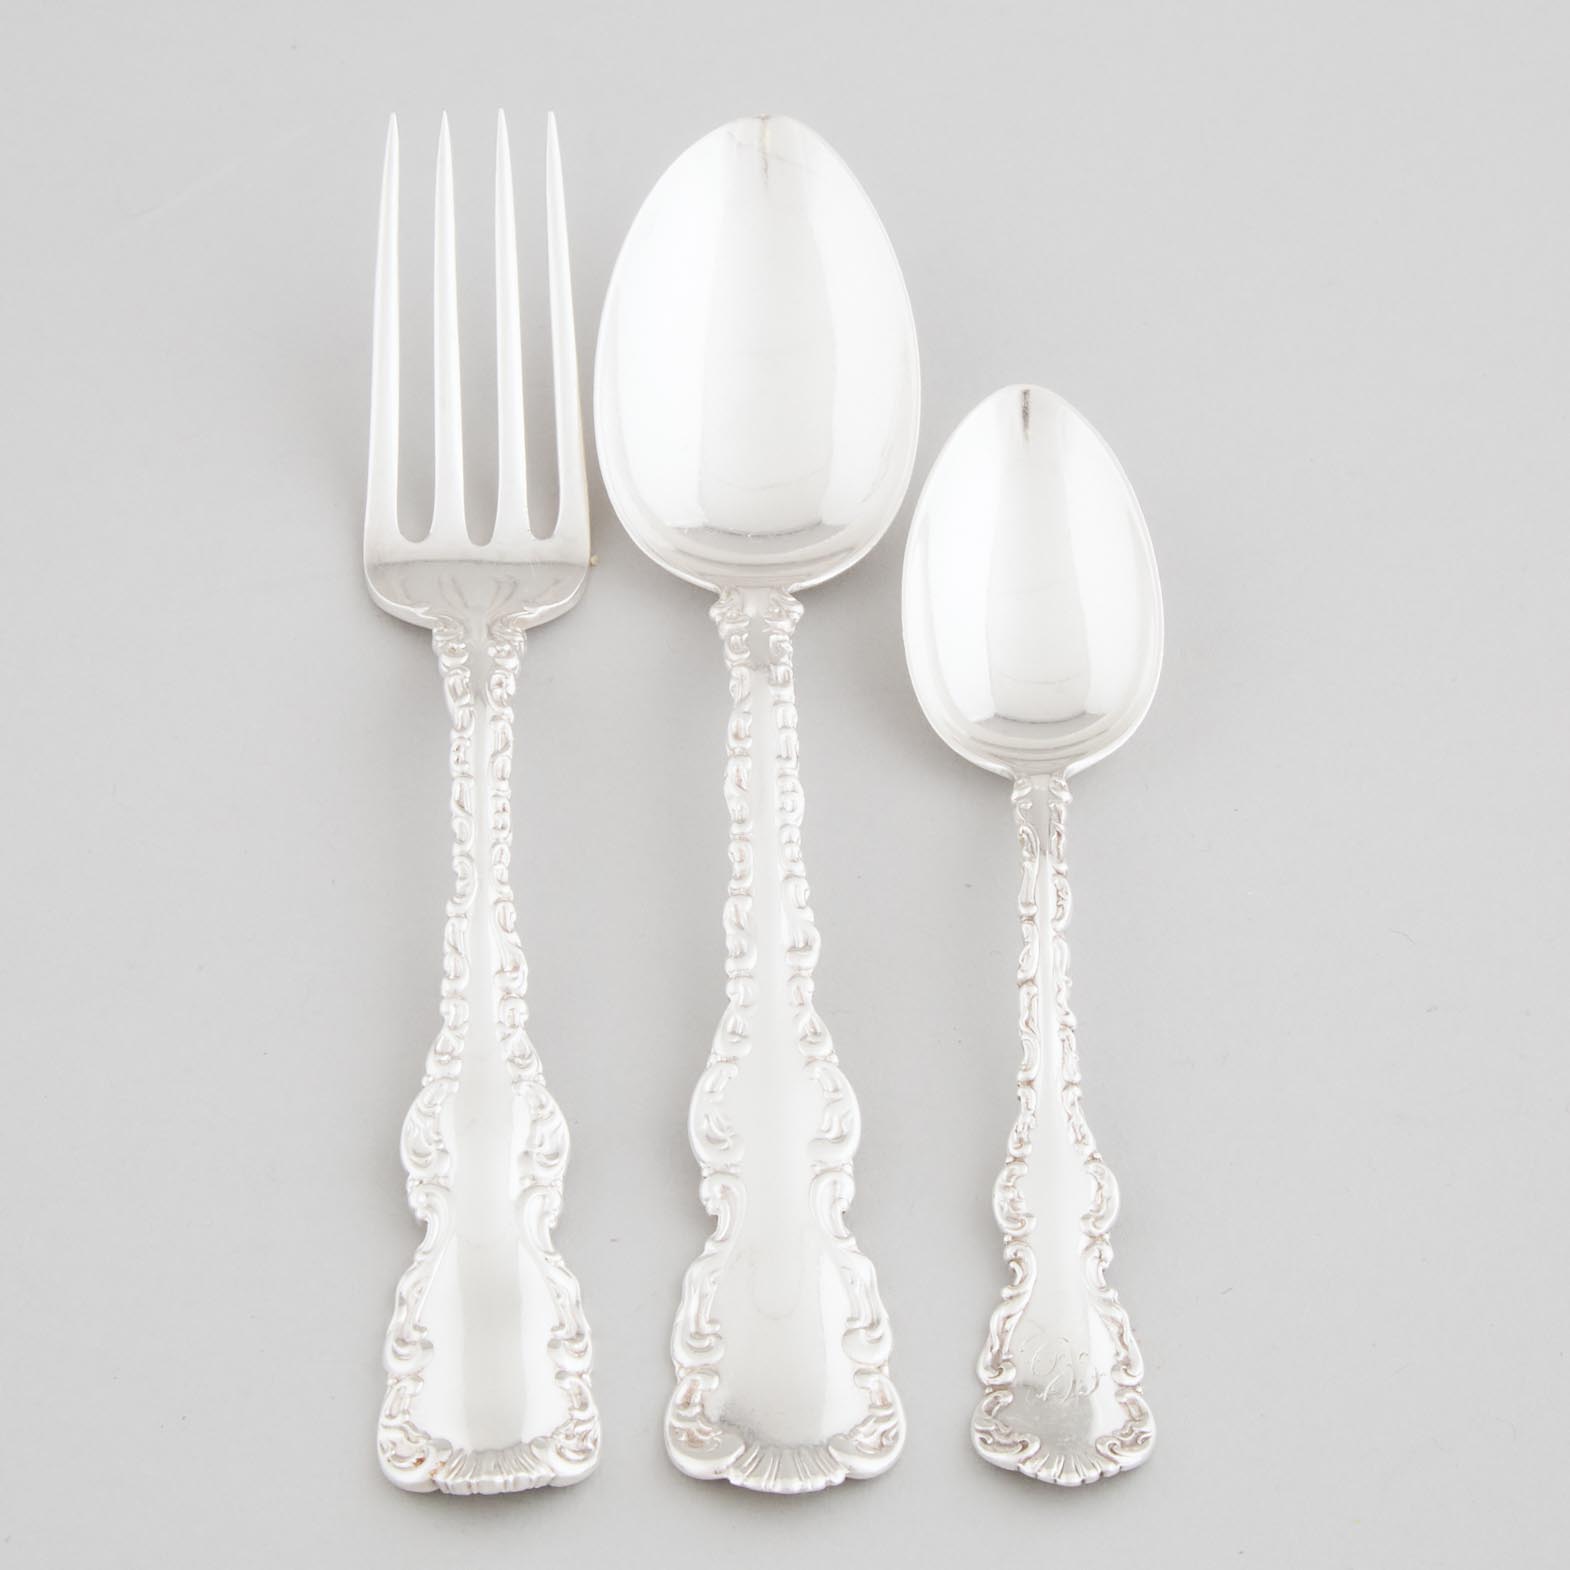 Canadian Silver 'Louis XV' Pattern Assembled Flatware, mainly J.E. Ellis & Co. and Roden Bros., Toronto, Ont., 20th century